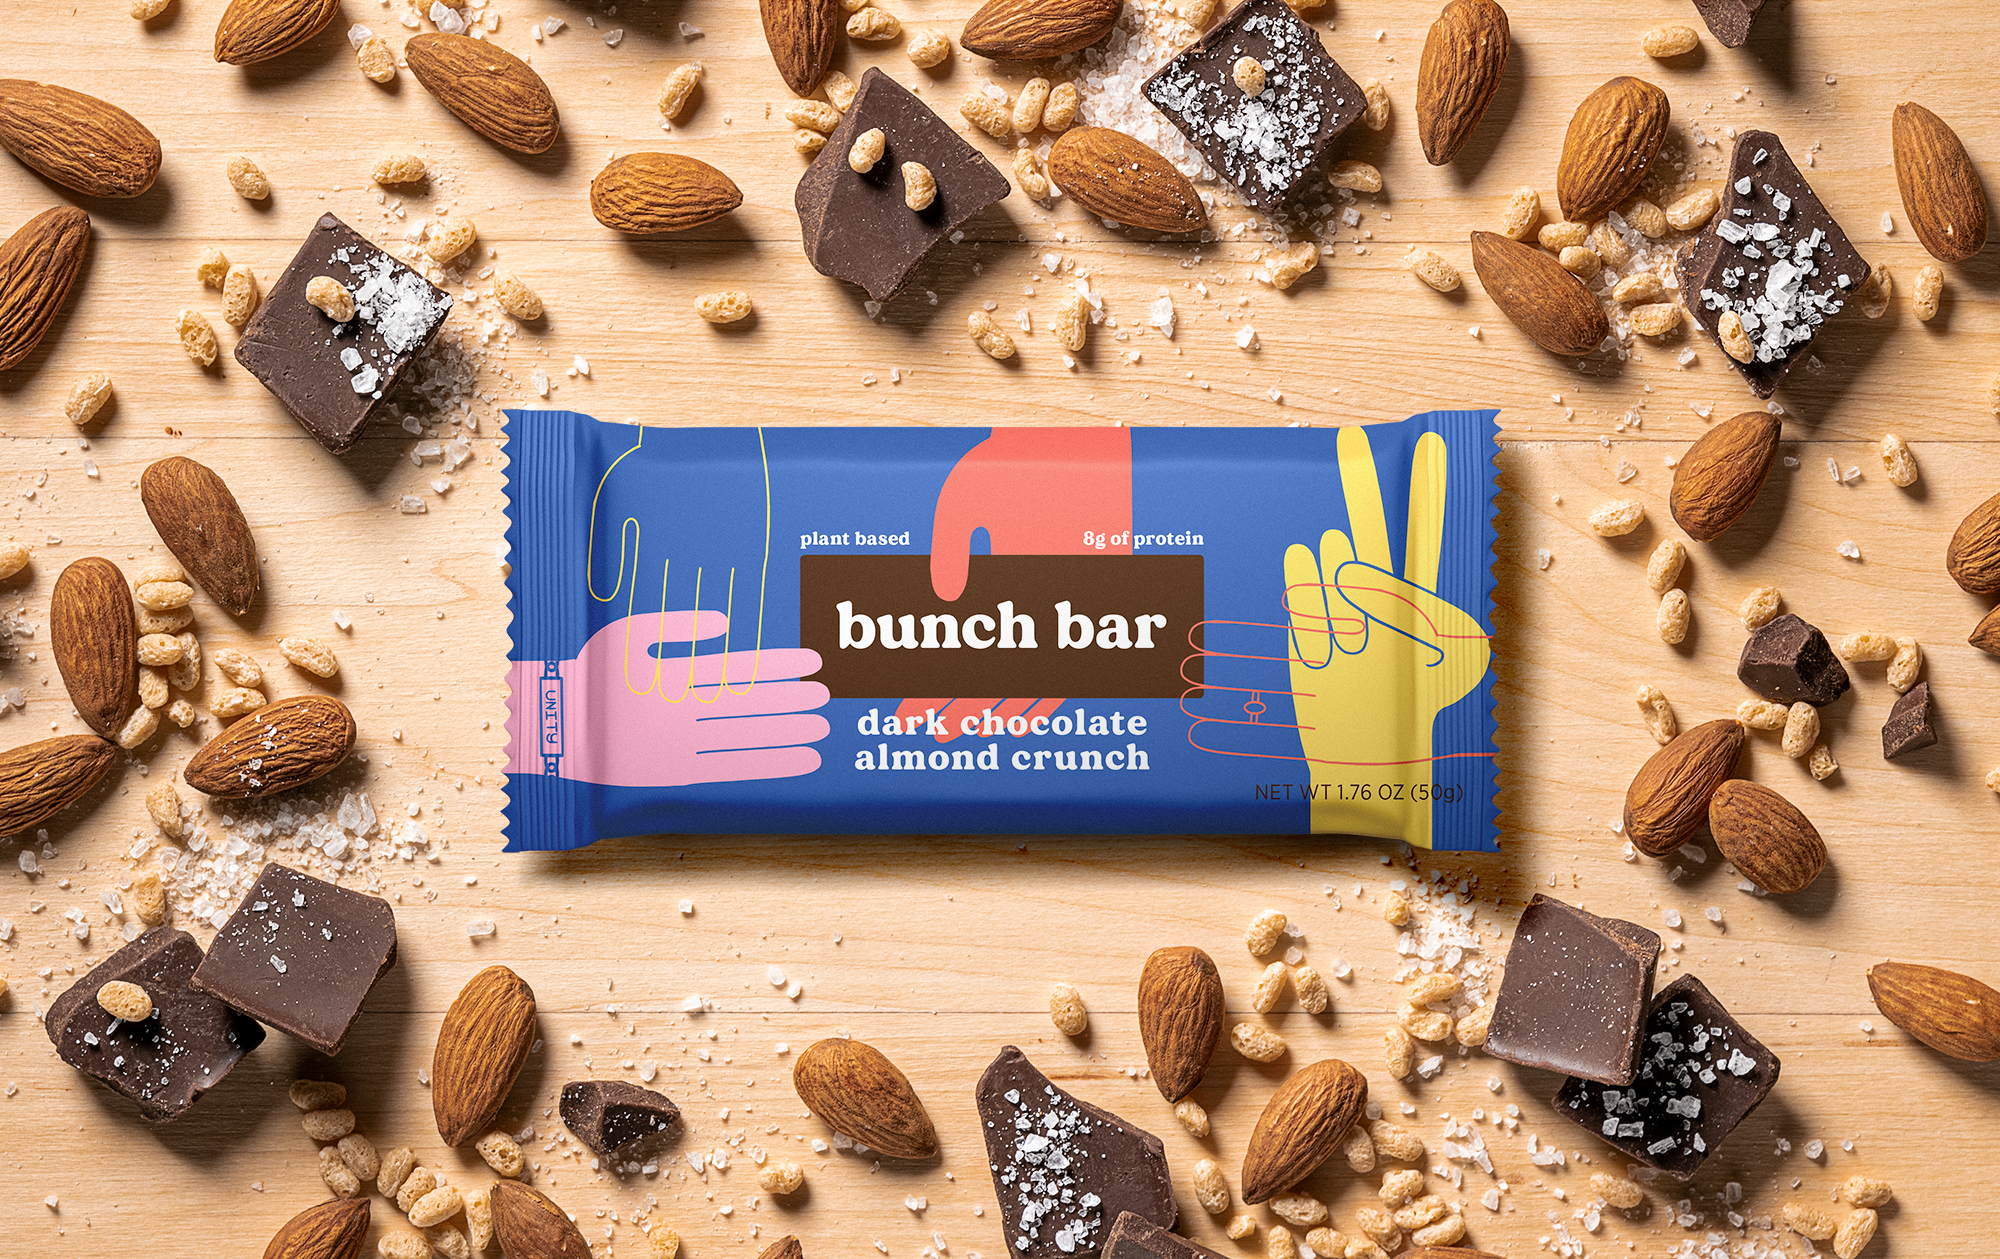 Take A Bite Out Of Bunch Bar